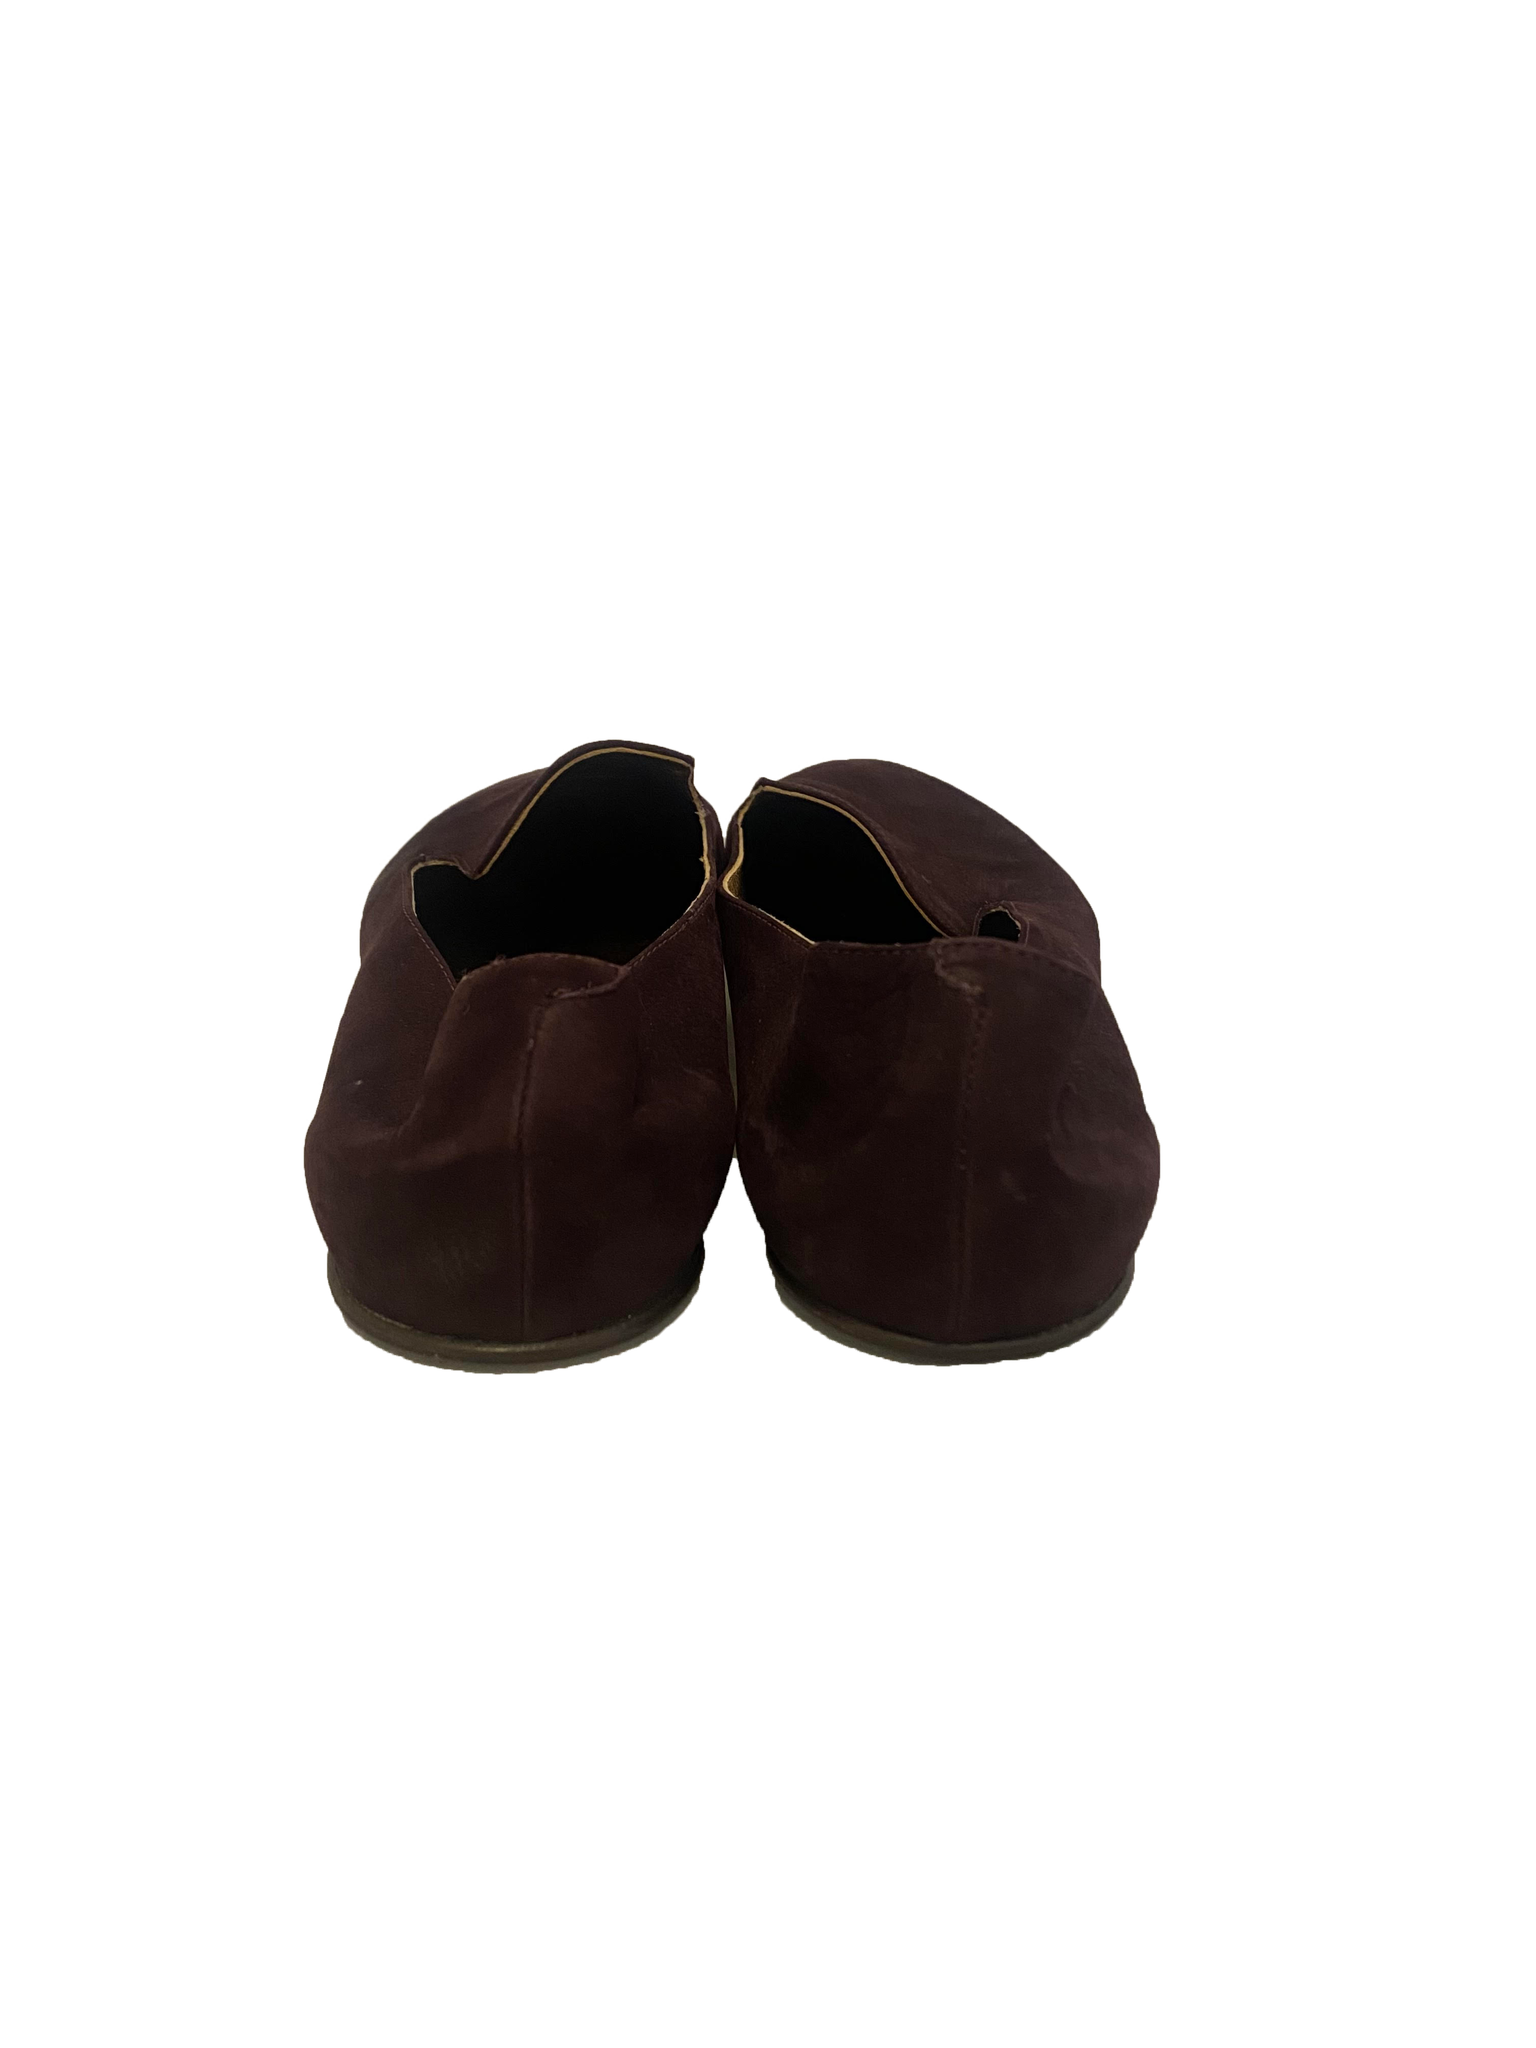 Suede Slipper Shoes